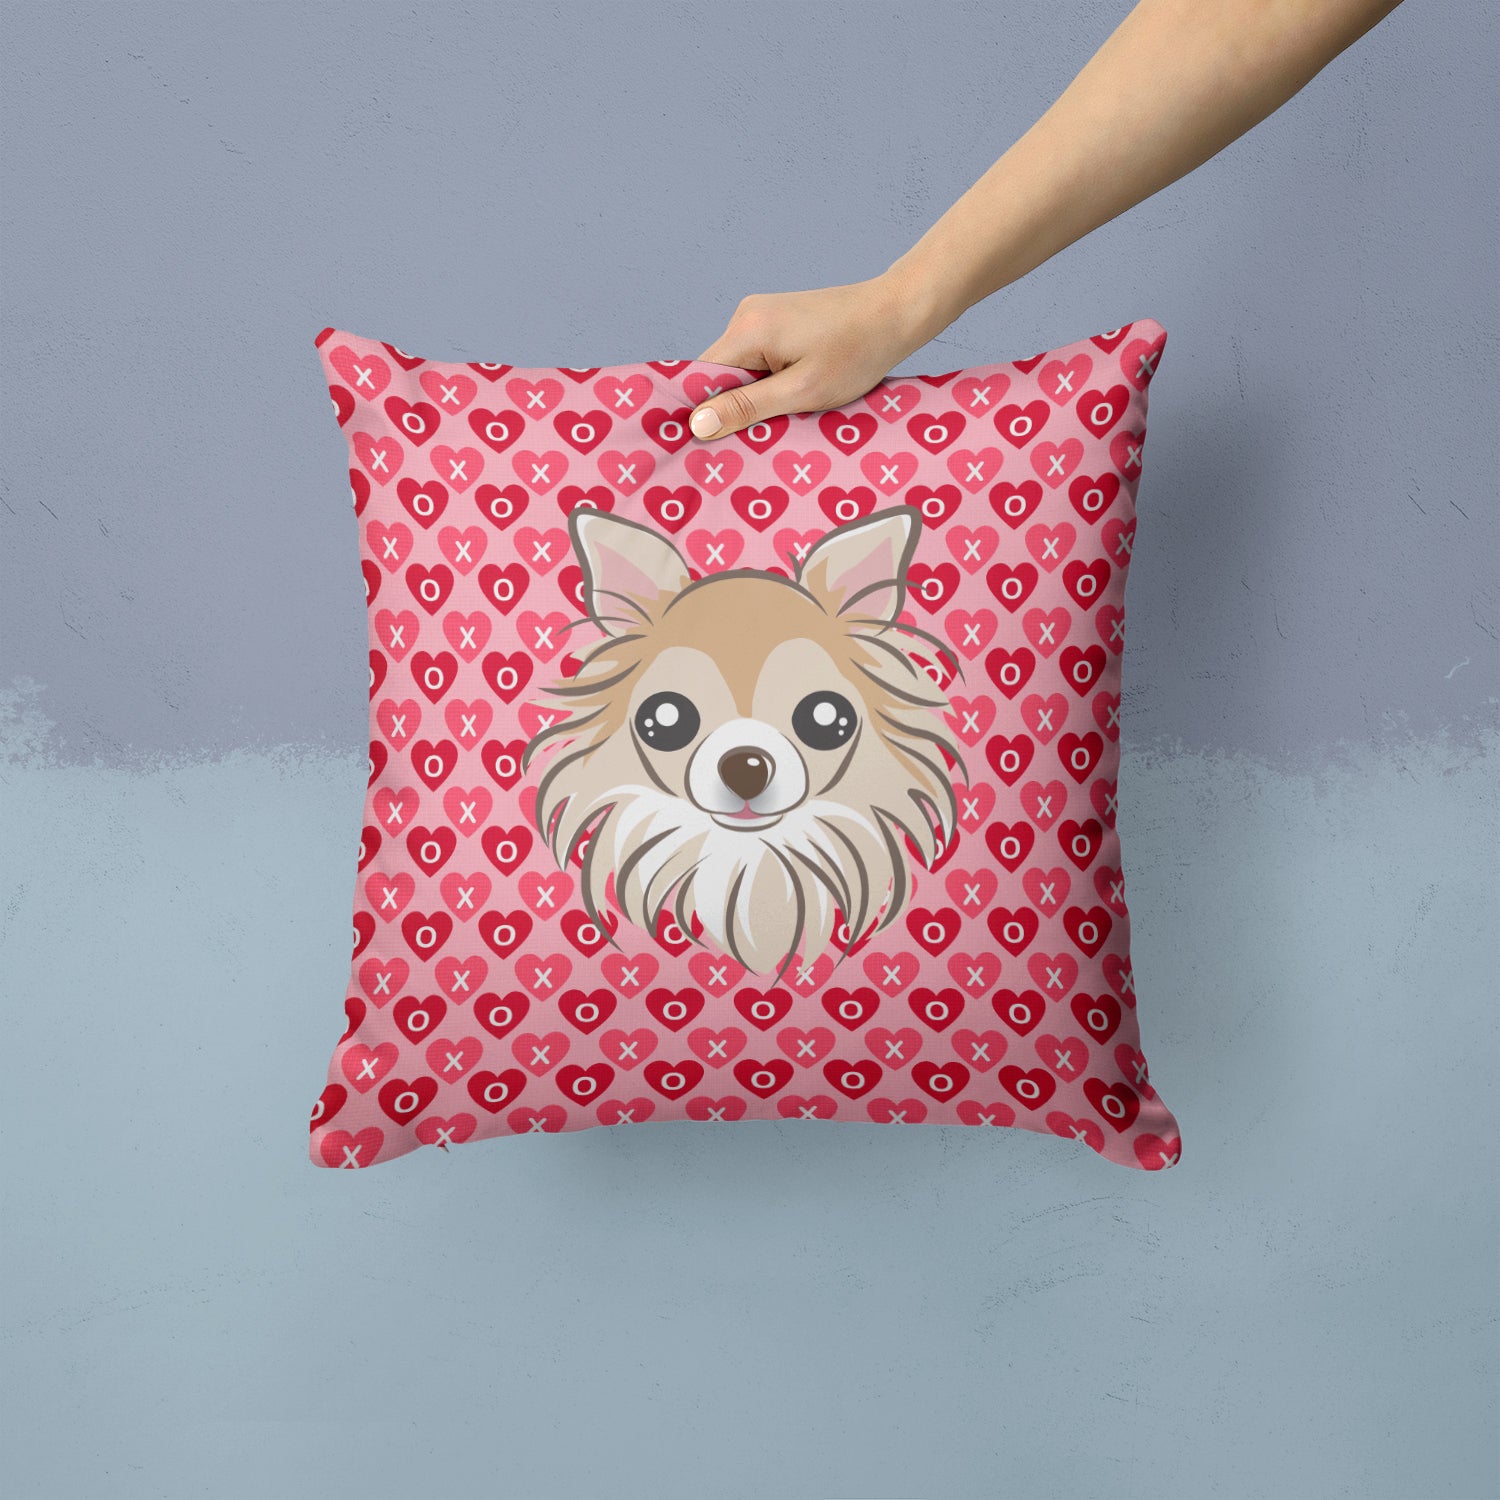 Chihuahua Hearts Fabric Decorative Pillow BB5321PW1414 - the-store.com